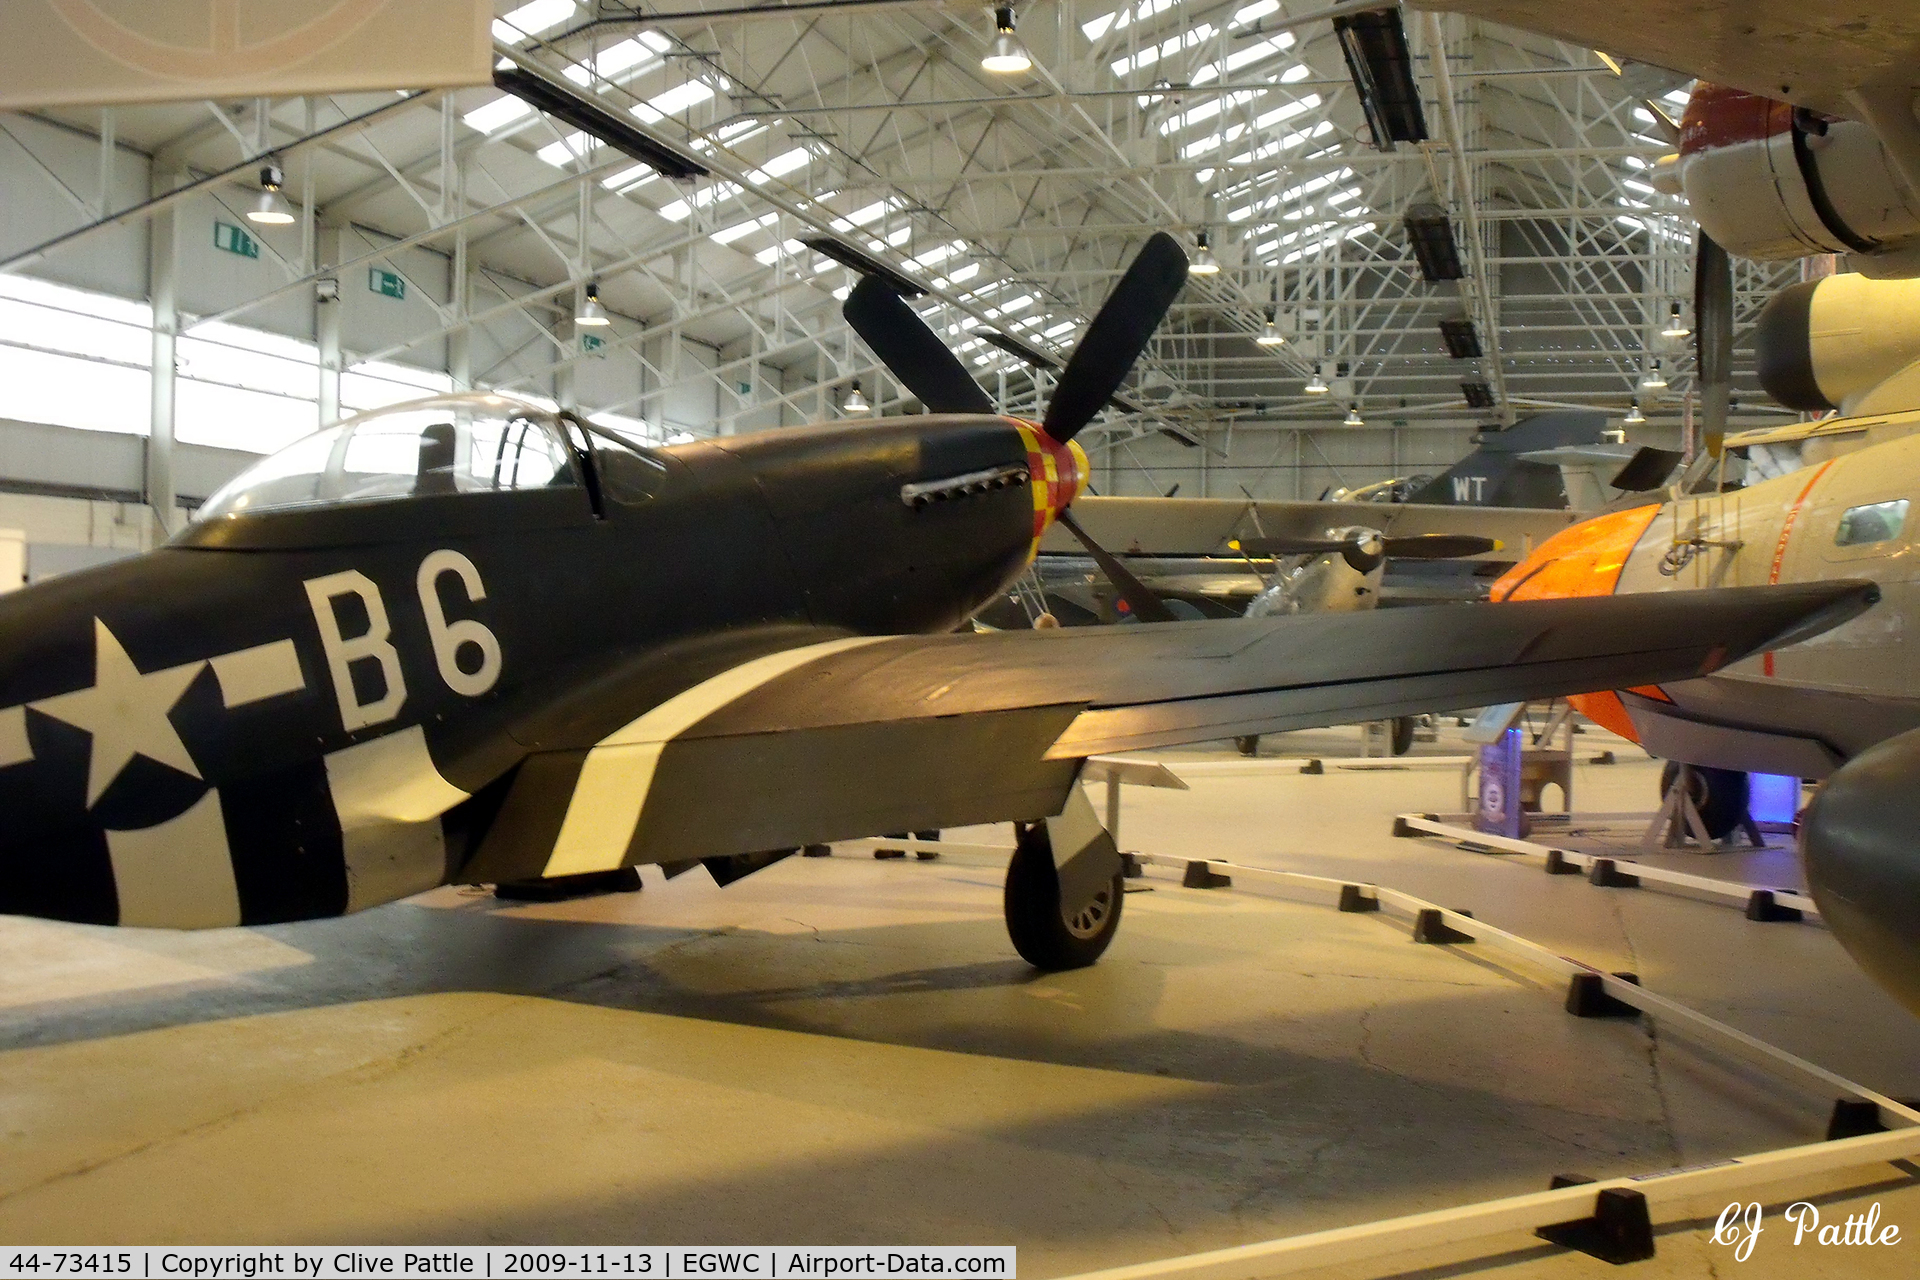 44-73415, 1945 North American P-51D Mustang C/N 122-39874, Preserved at the RAF Museum Cosford at EGWC